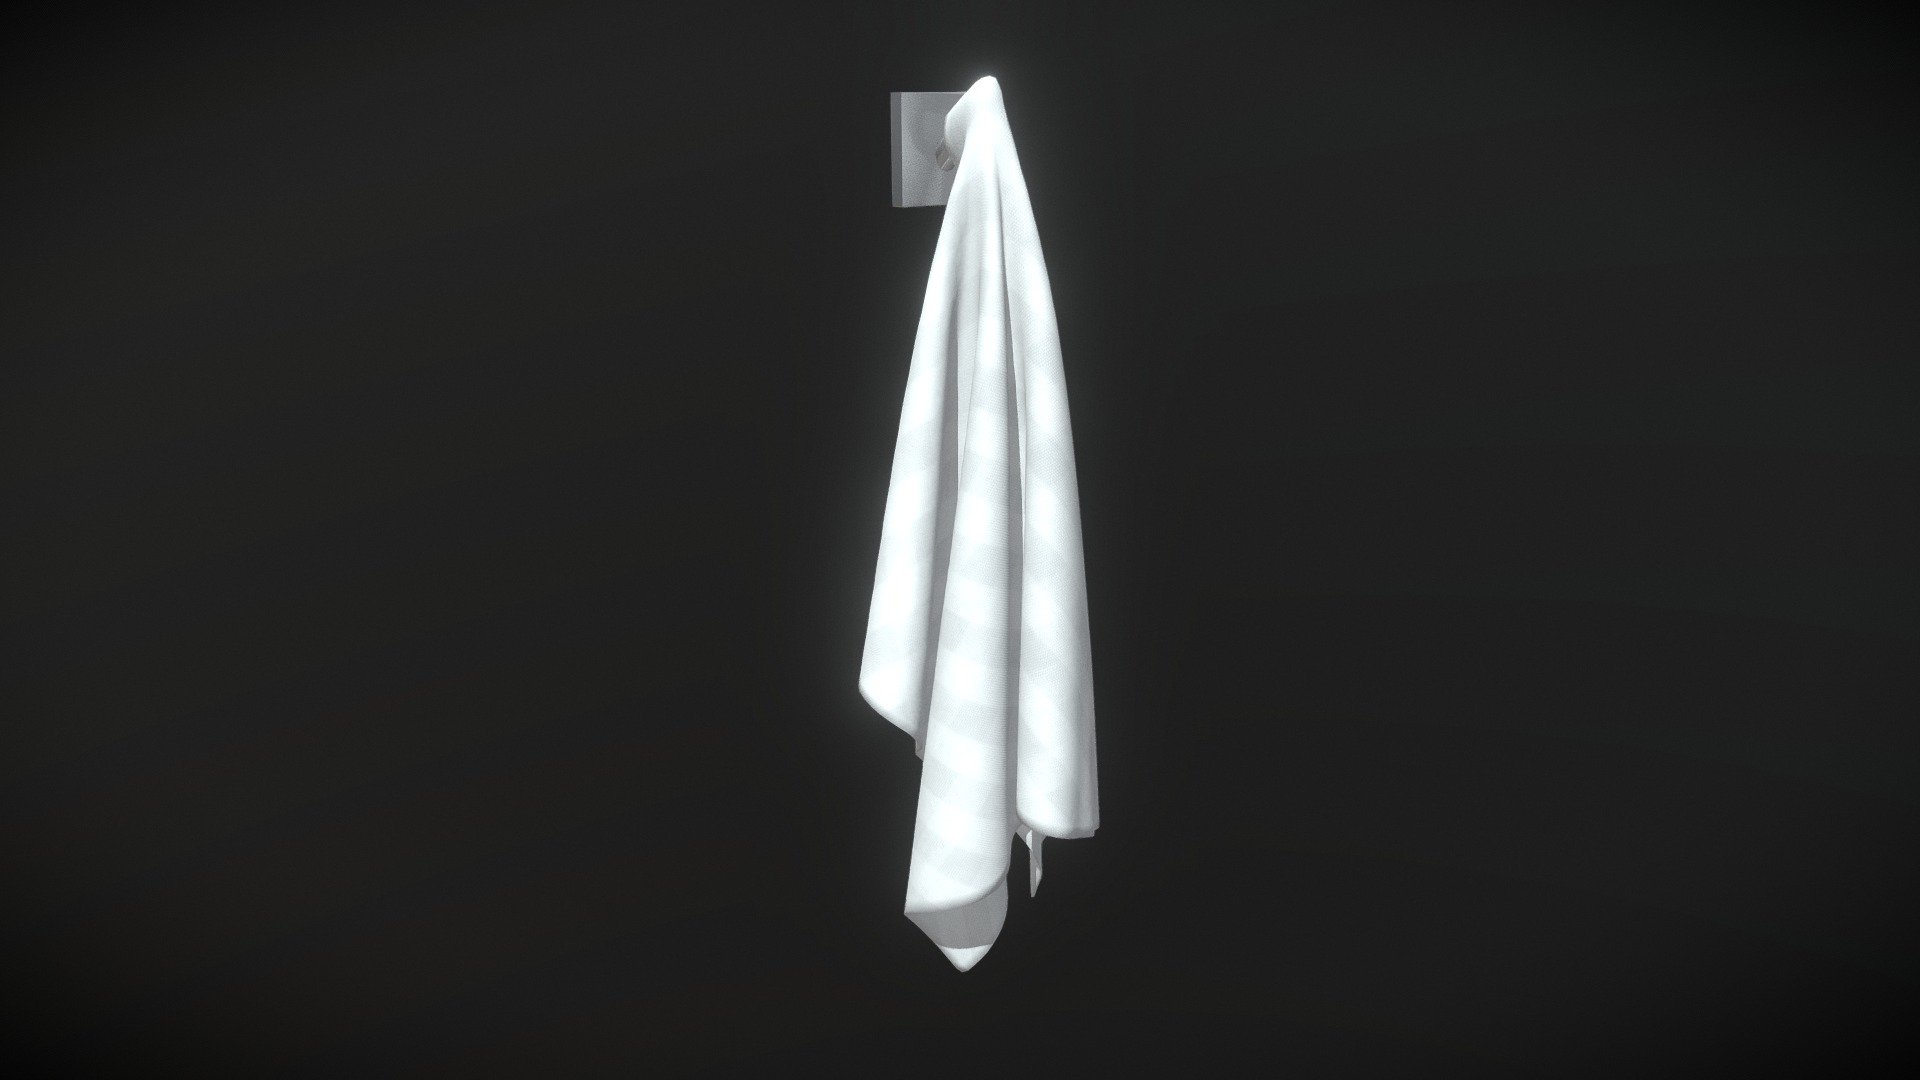 Perfect for a modern kitchen or bathroom. It us extremely easy to modify the towel texture - just put your own texture (or a few I provide in the additional files) into the towel material slot. It features full quad geometry, easy to smooth 3d model